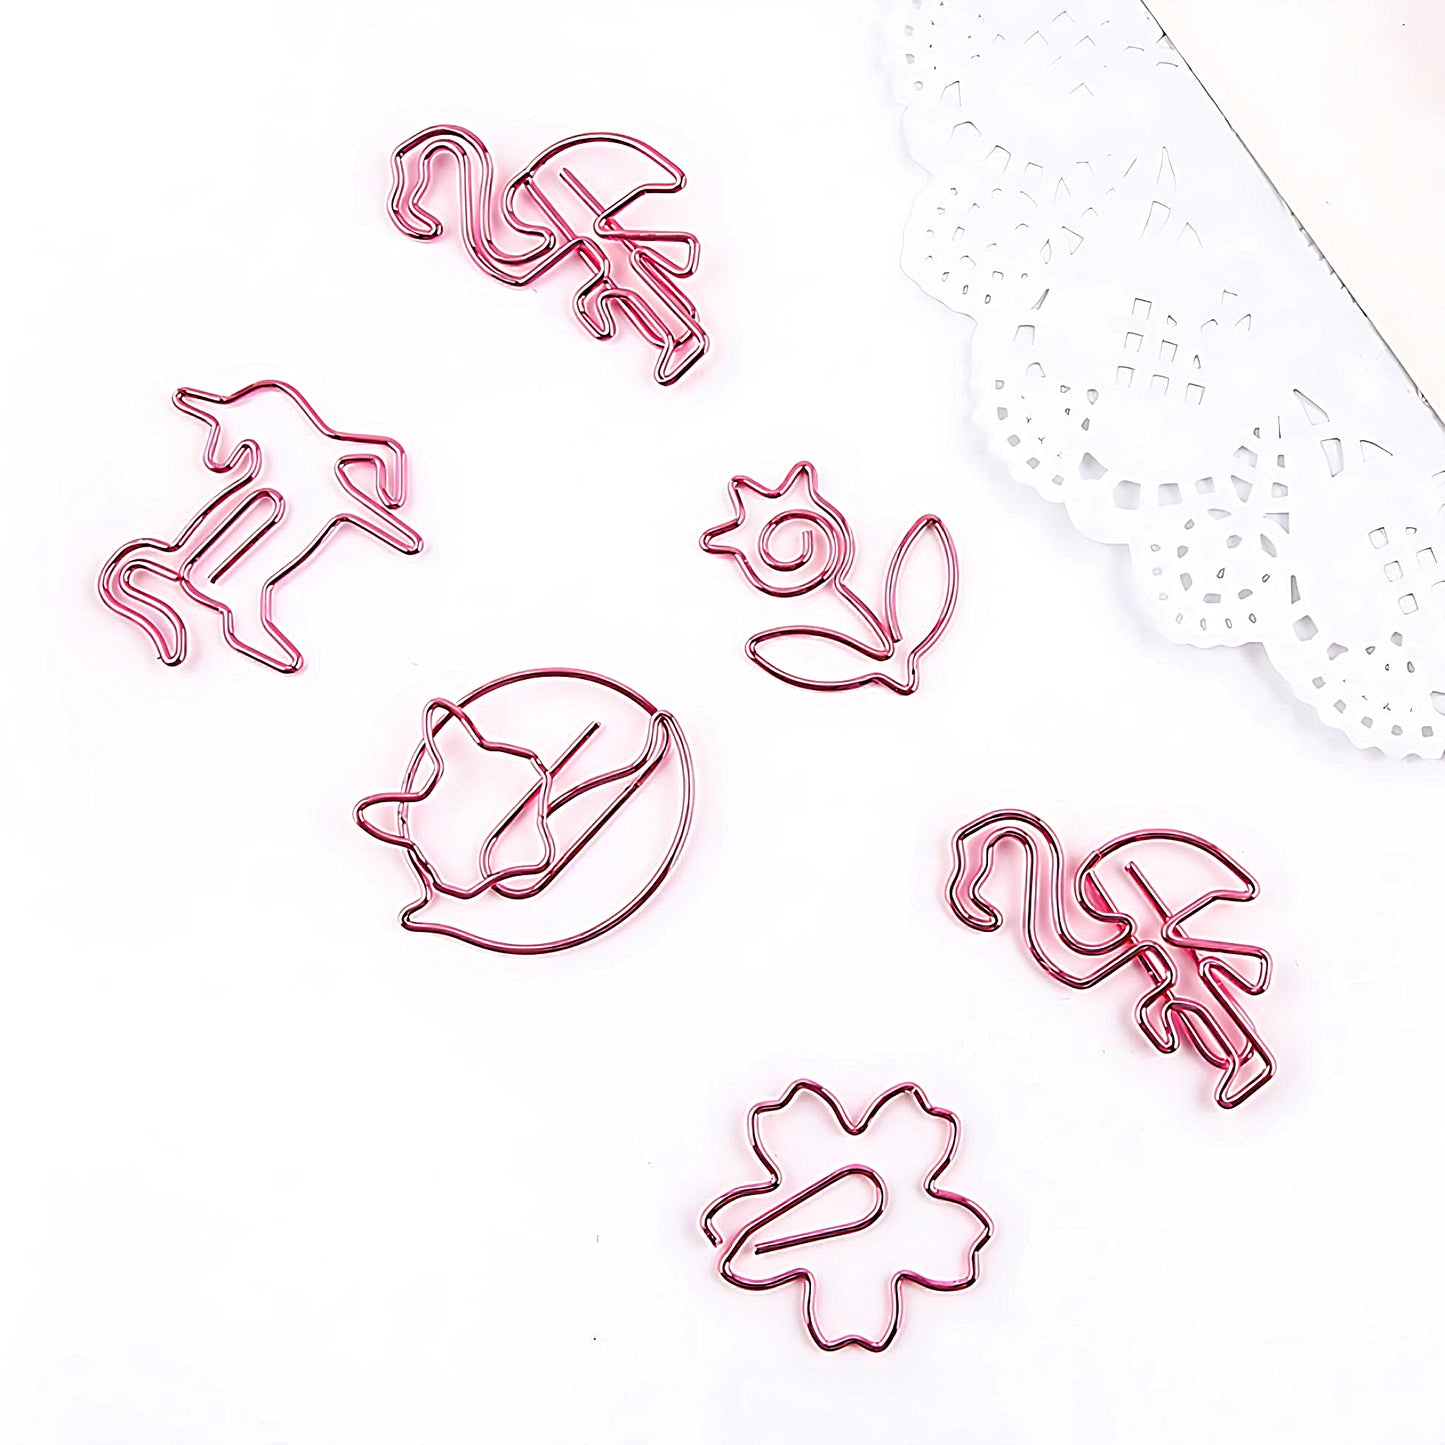 6 pink paper clips in the shape of various animals